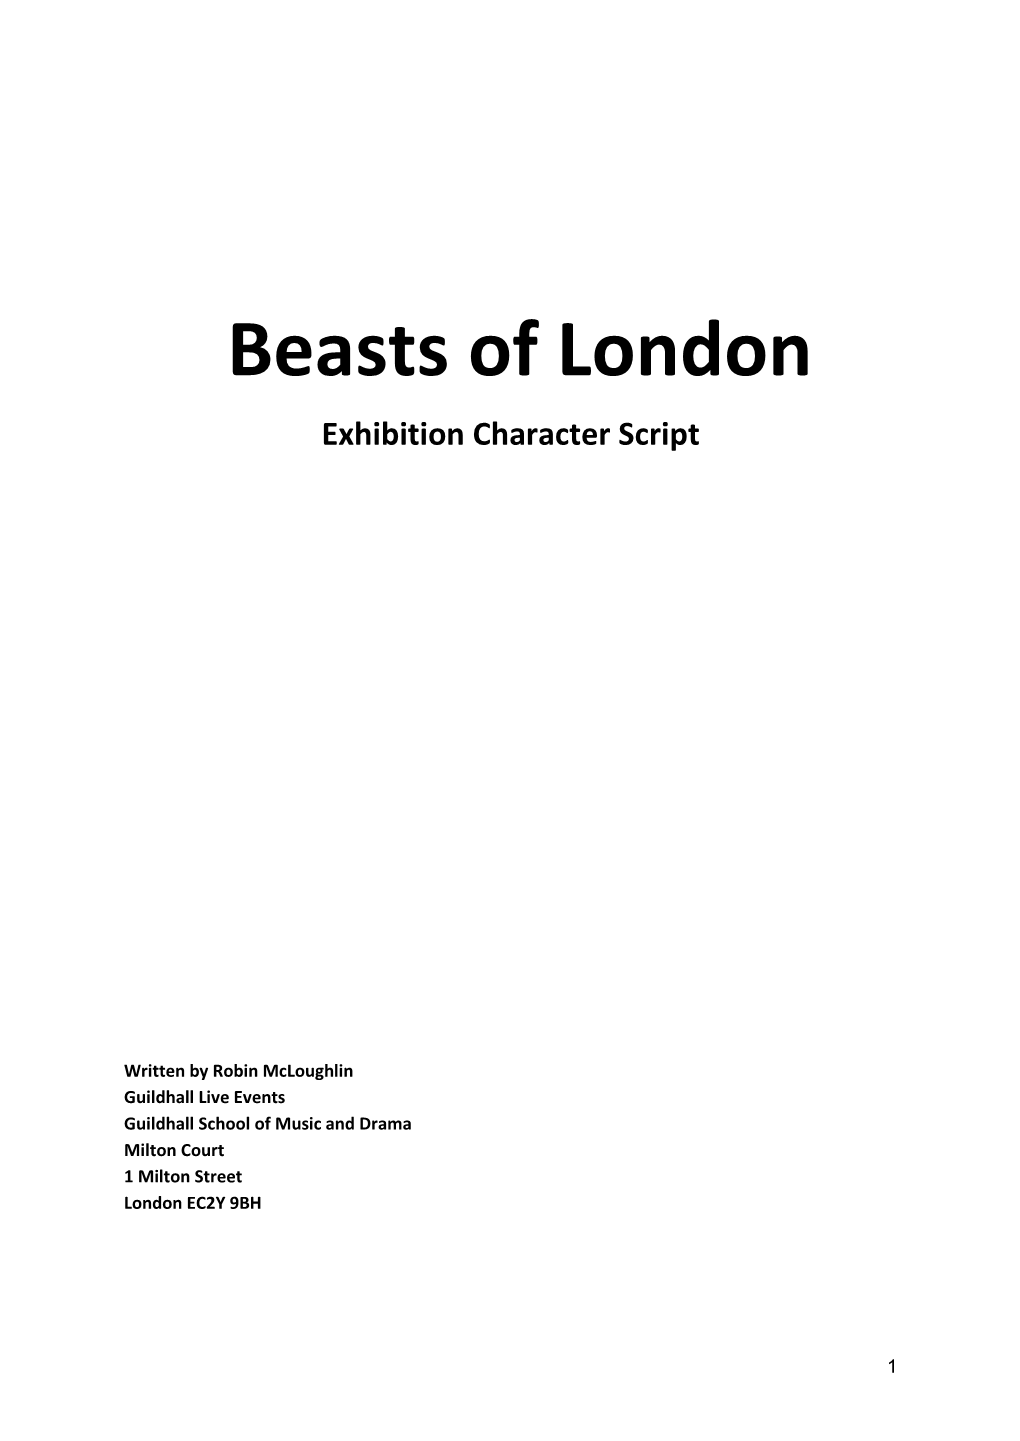 Beasts of London Exhibition Character Script